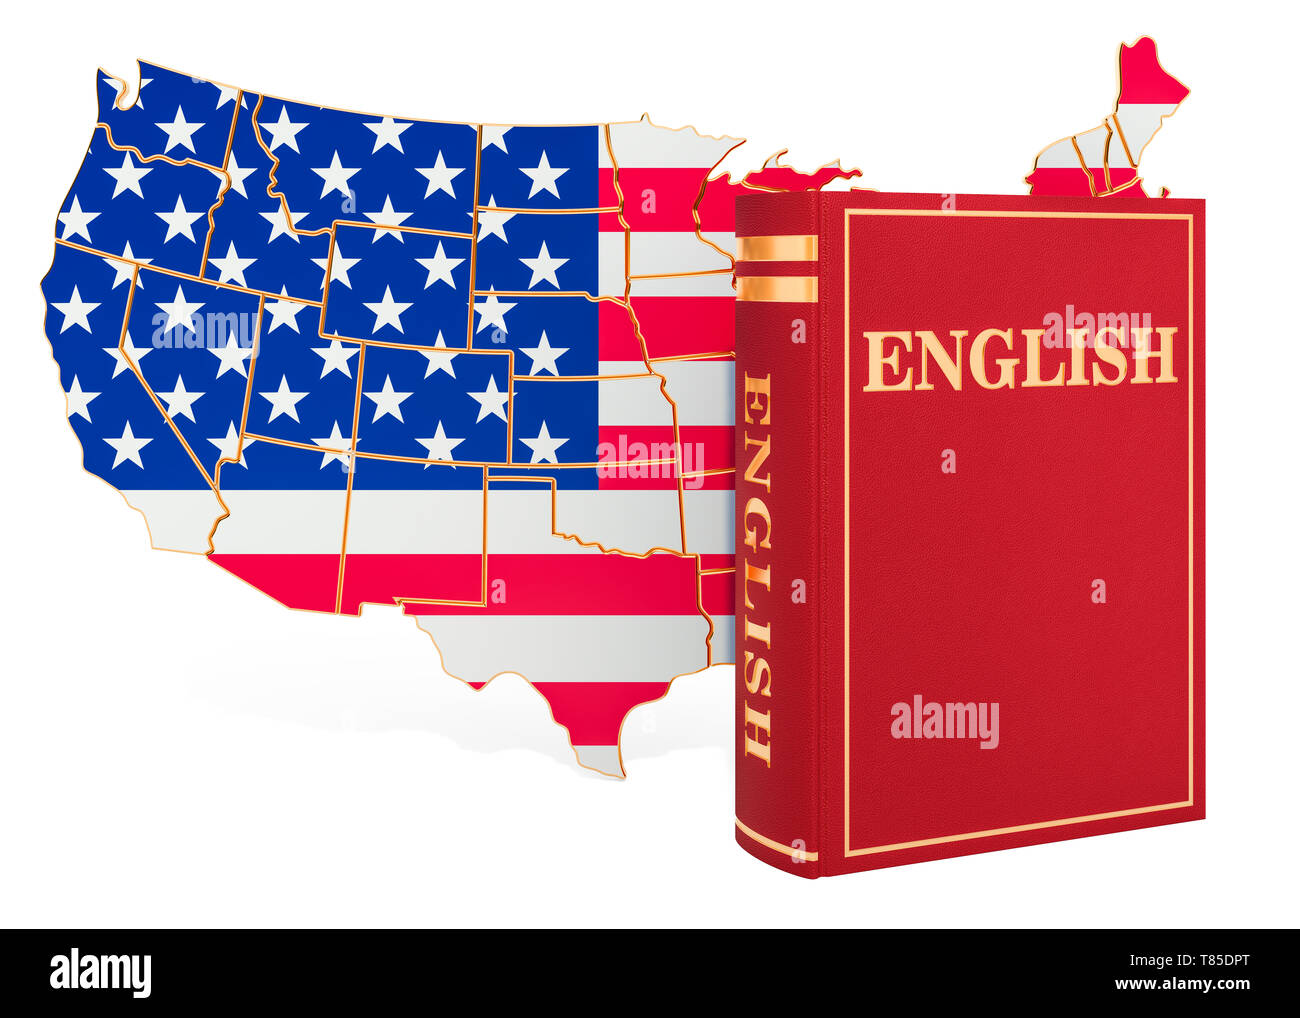 English language book with map of the United States, 3D rendering isolated on white background Stock Photo